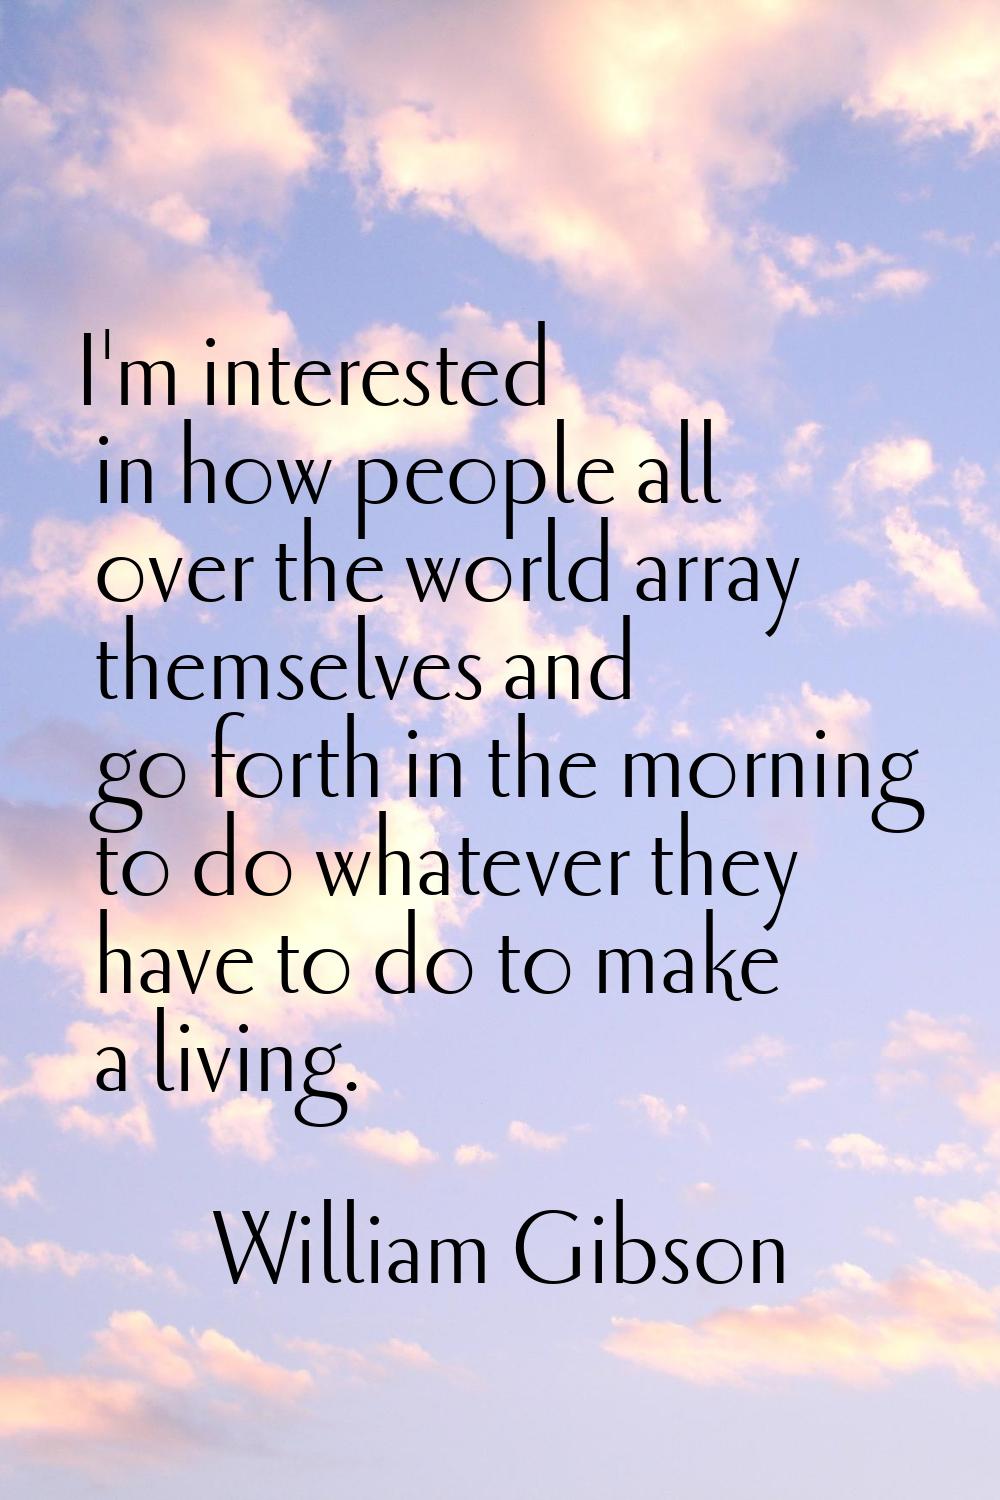 I'm interested in how people all over the world array themselves and go forth in the morning to do 